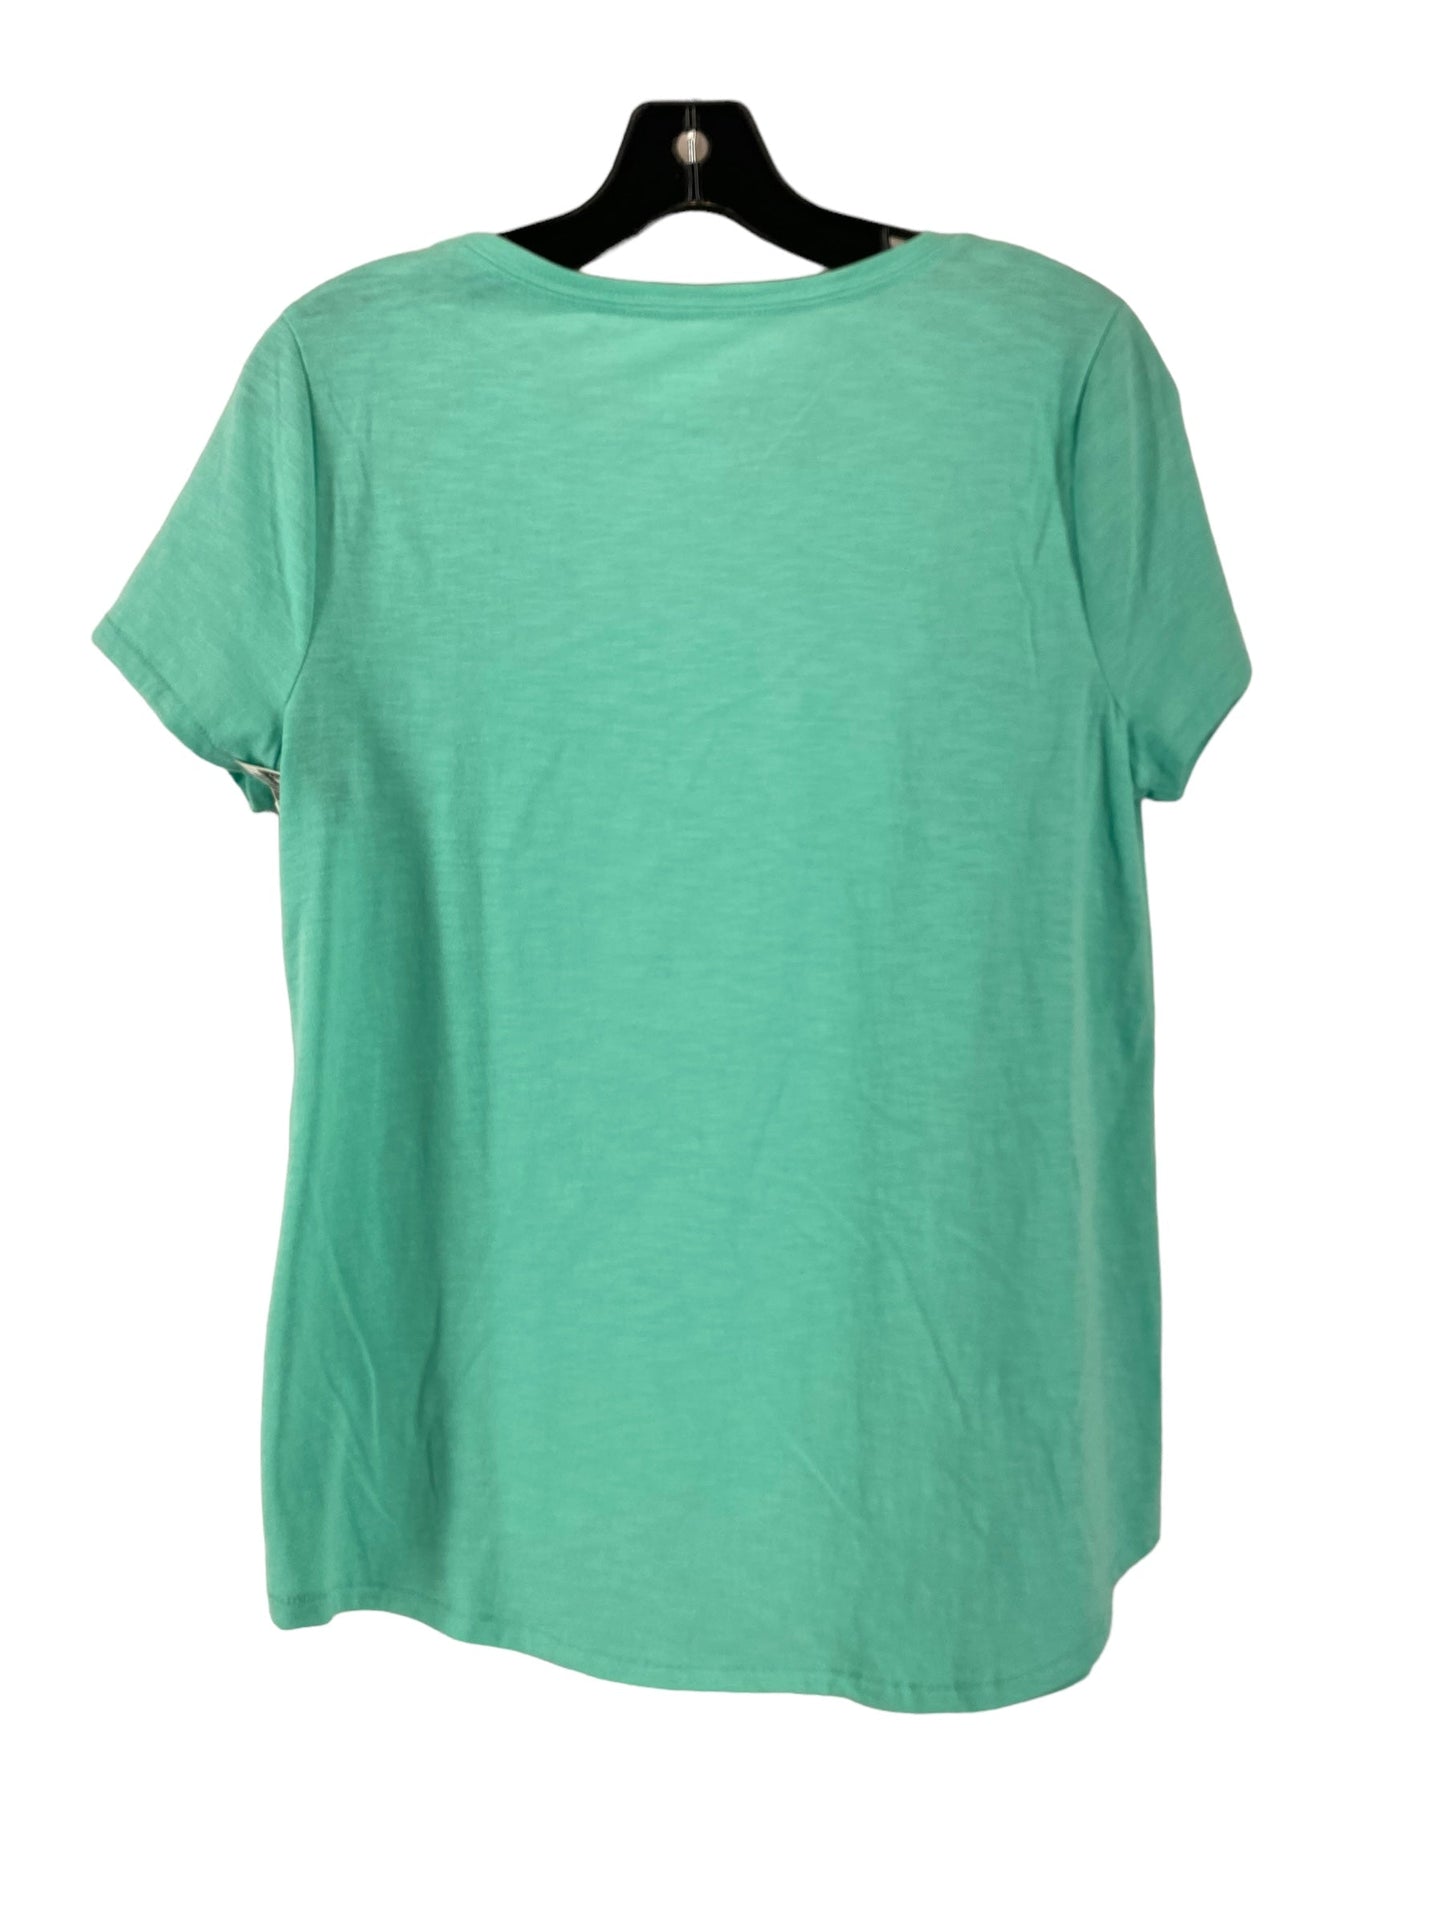 Teal Top Short Sleeve Sonoma, Size M